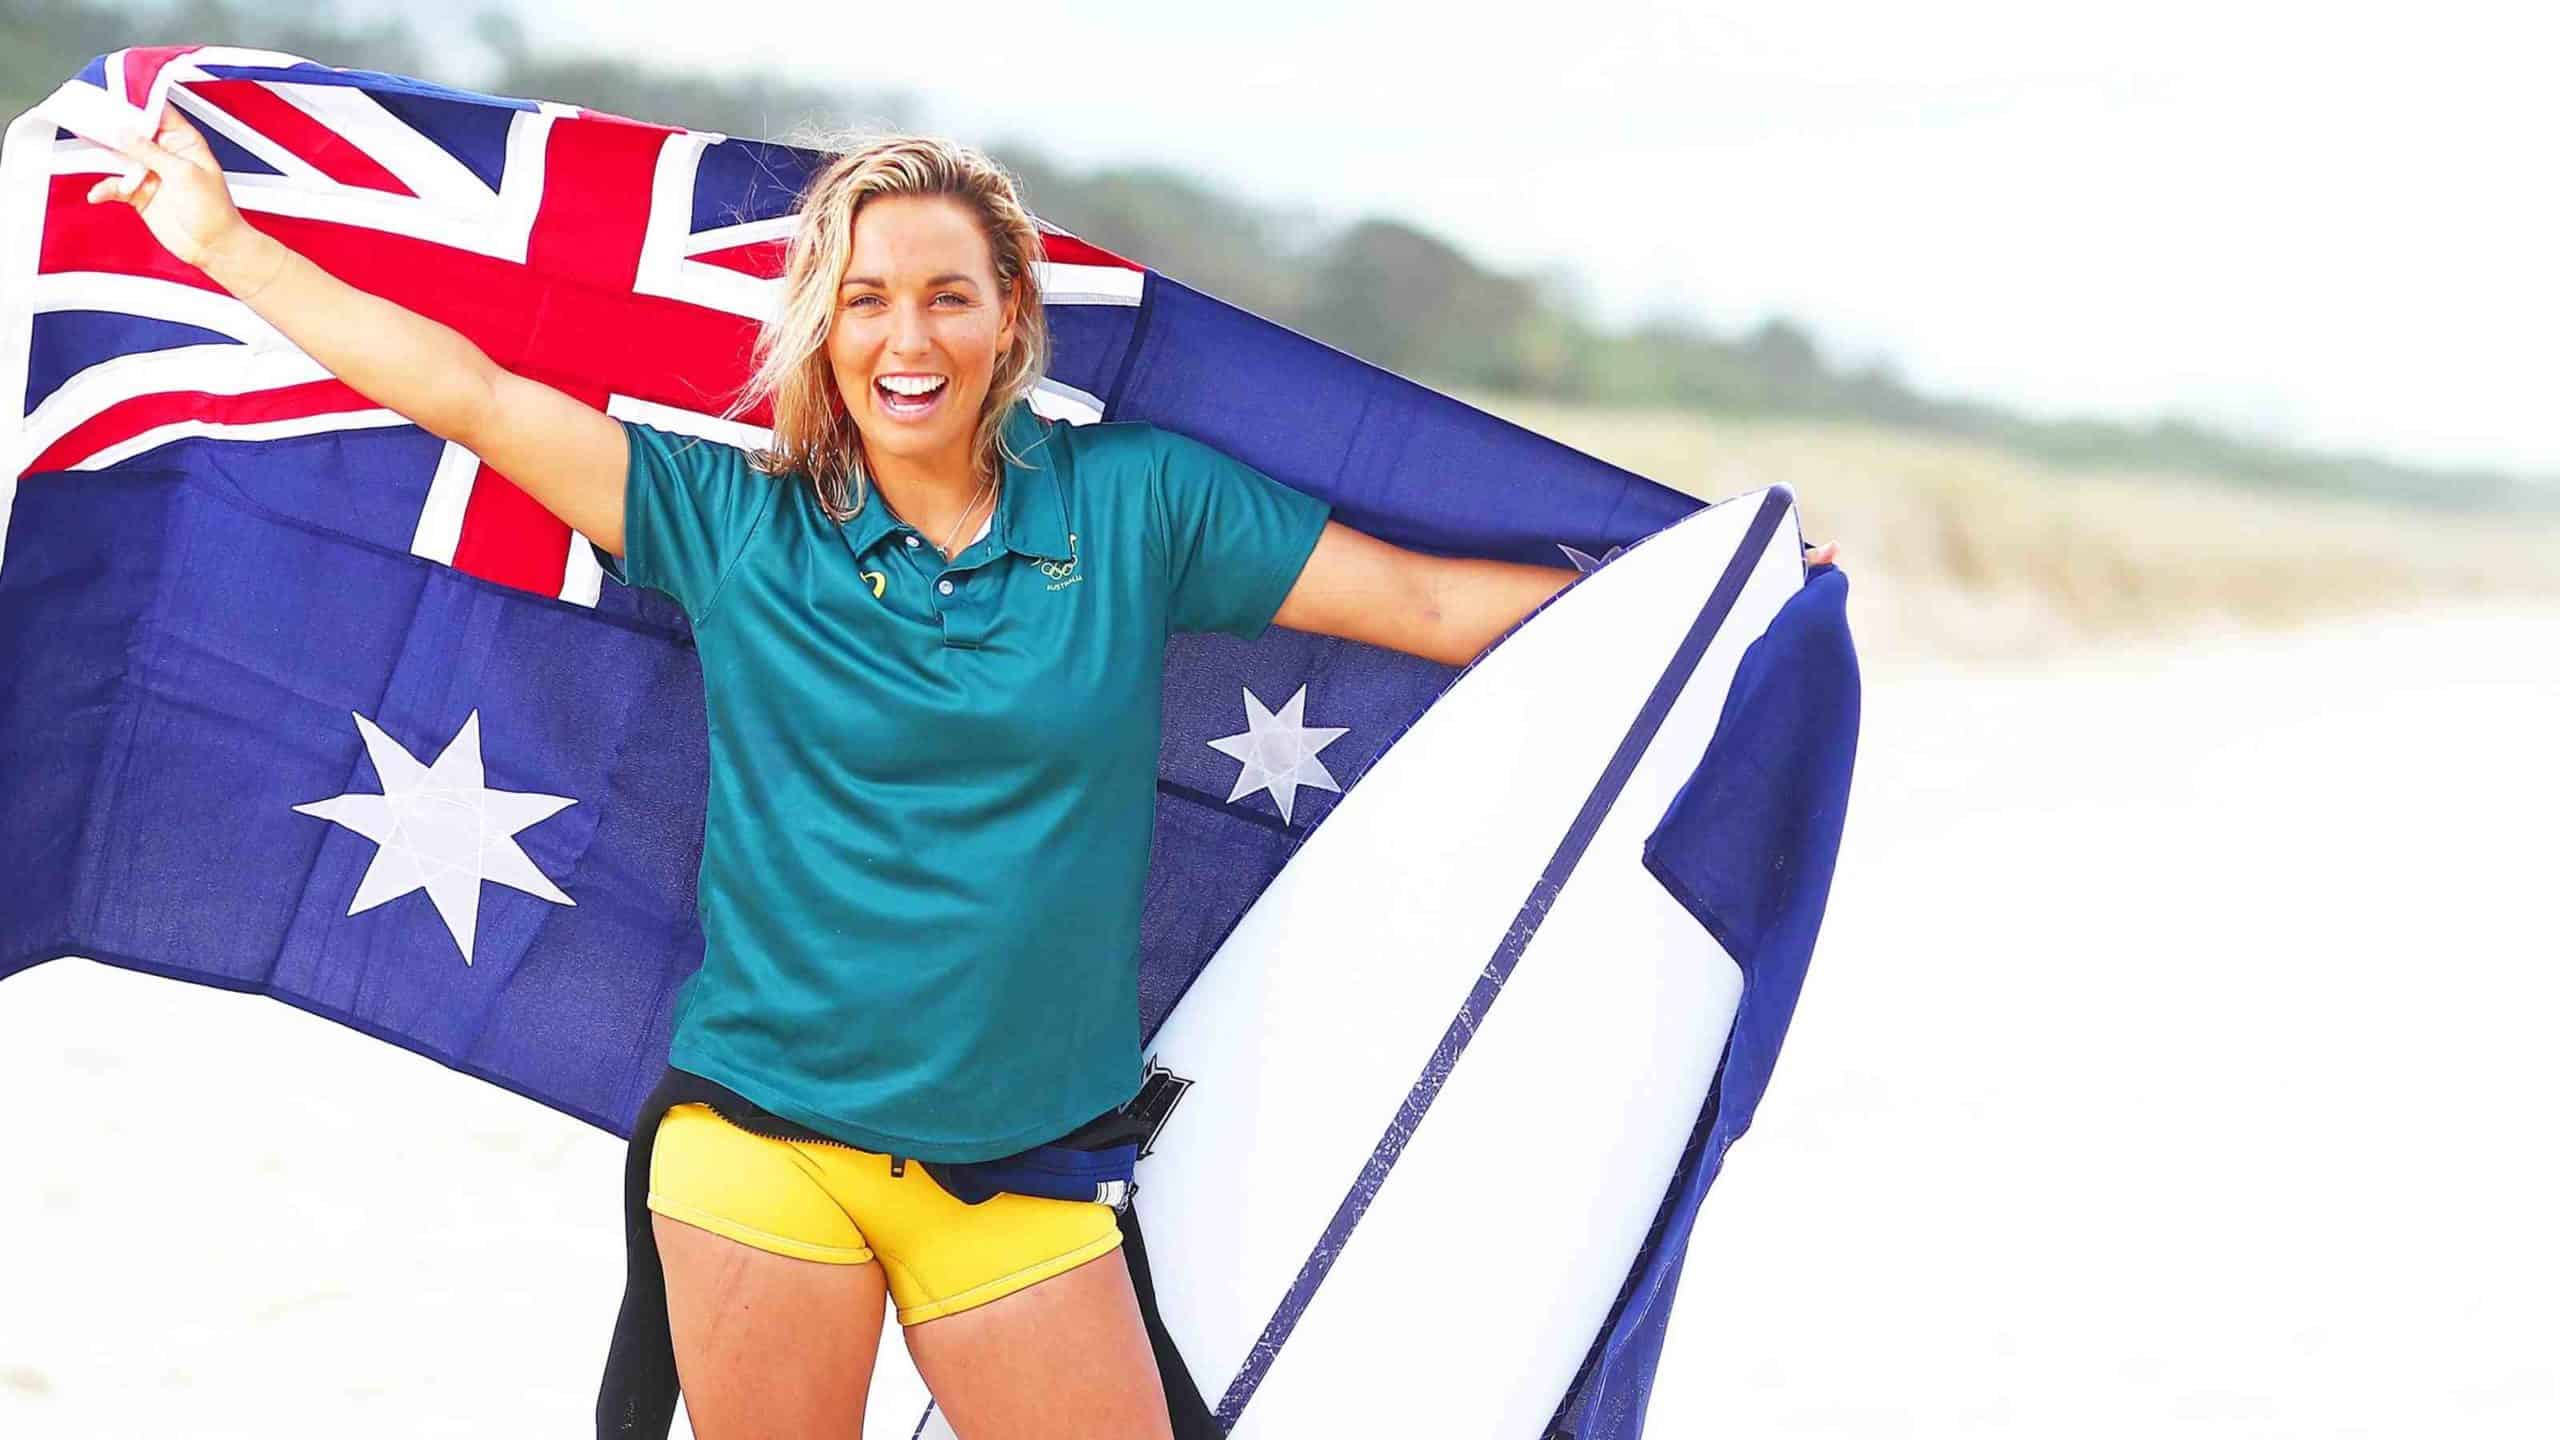 Who is Sally Fitzgibbons coach?